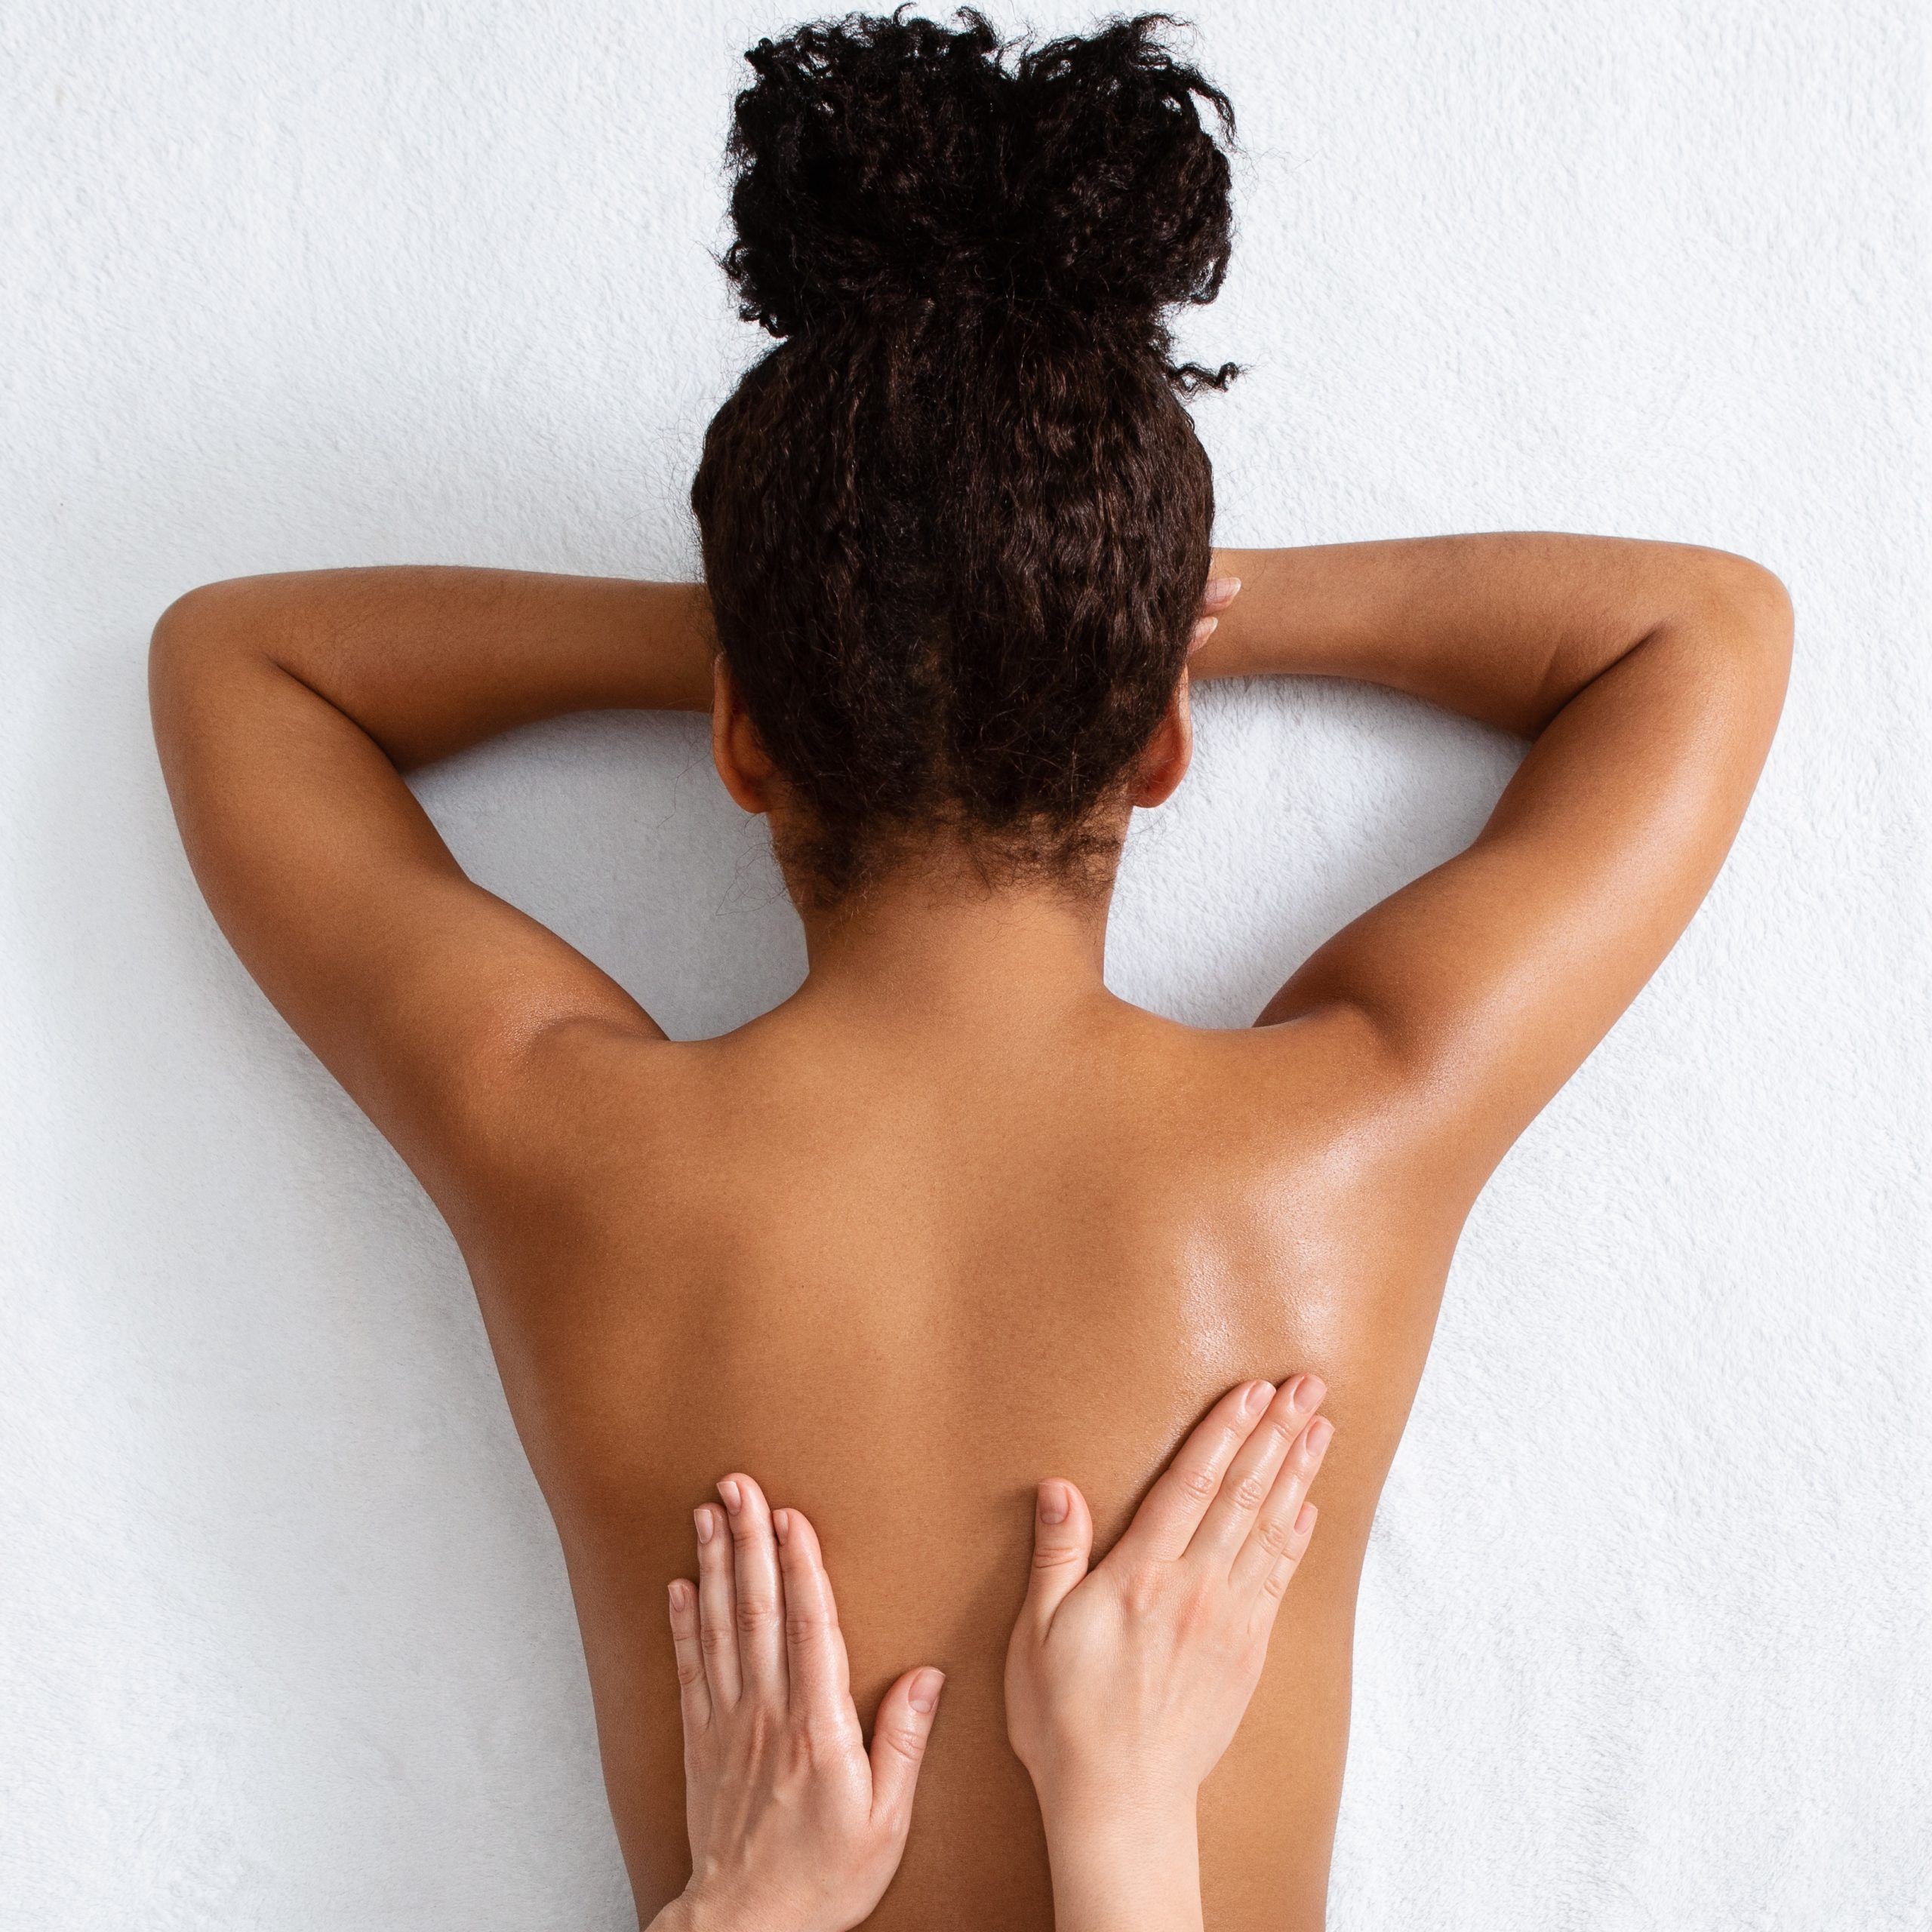 What’s A Back Facial And Do I Really Need One?